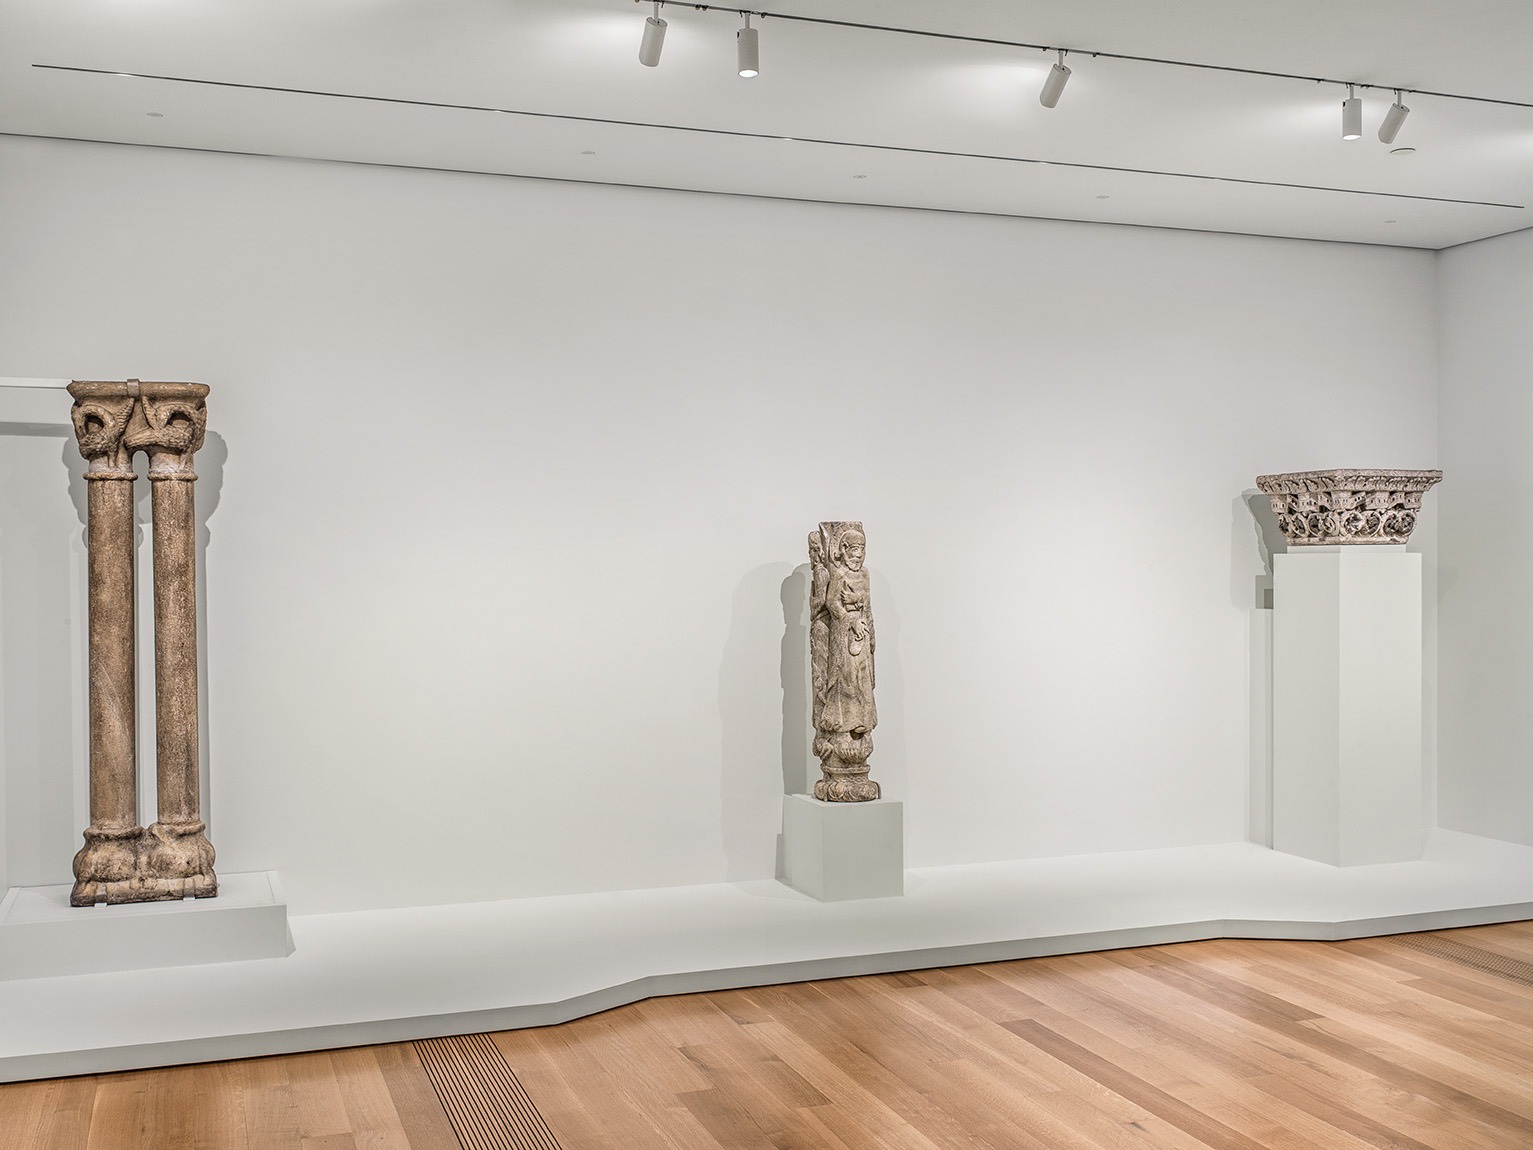 Three stone columns from the middle ages on display at the Pulitzer